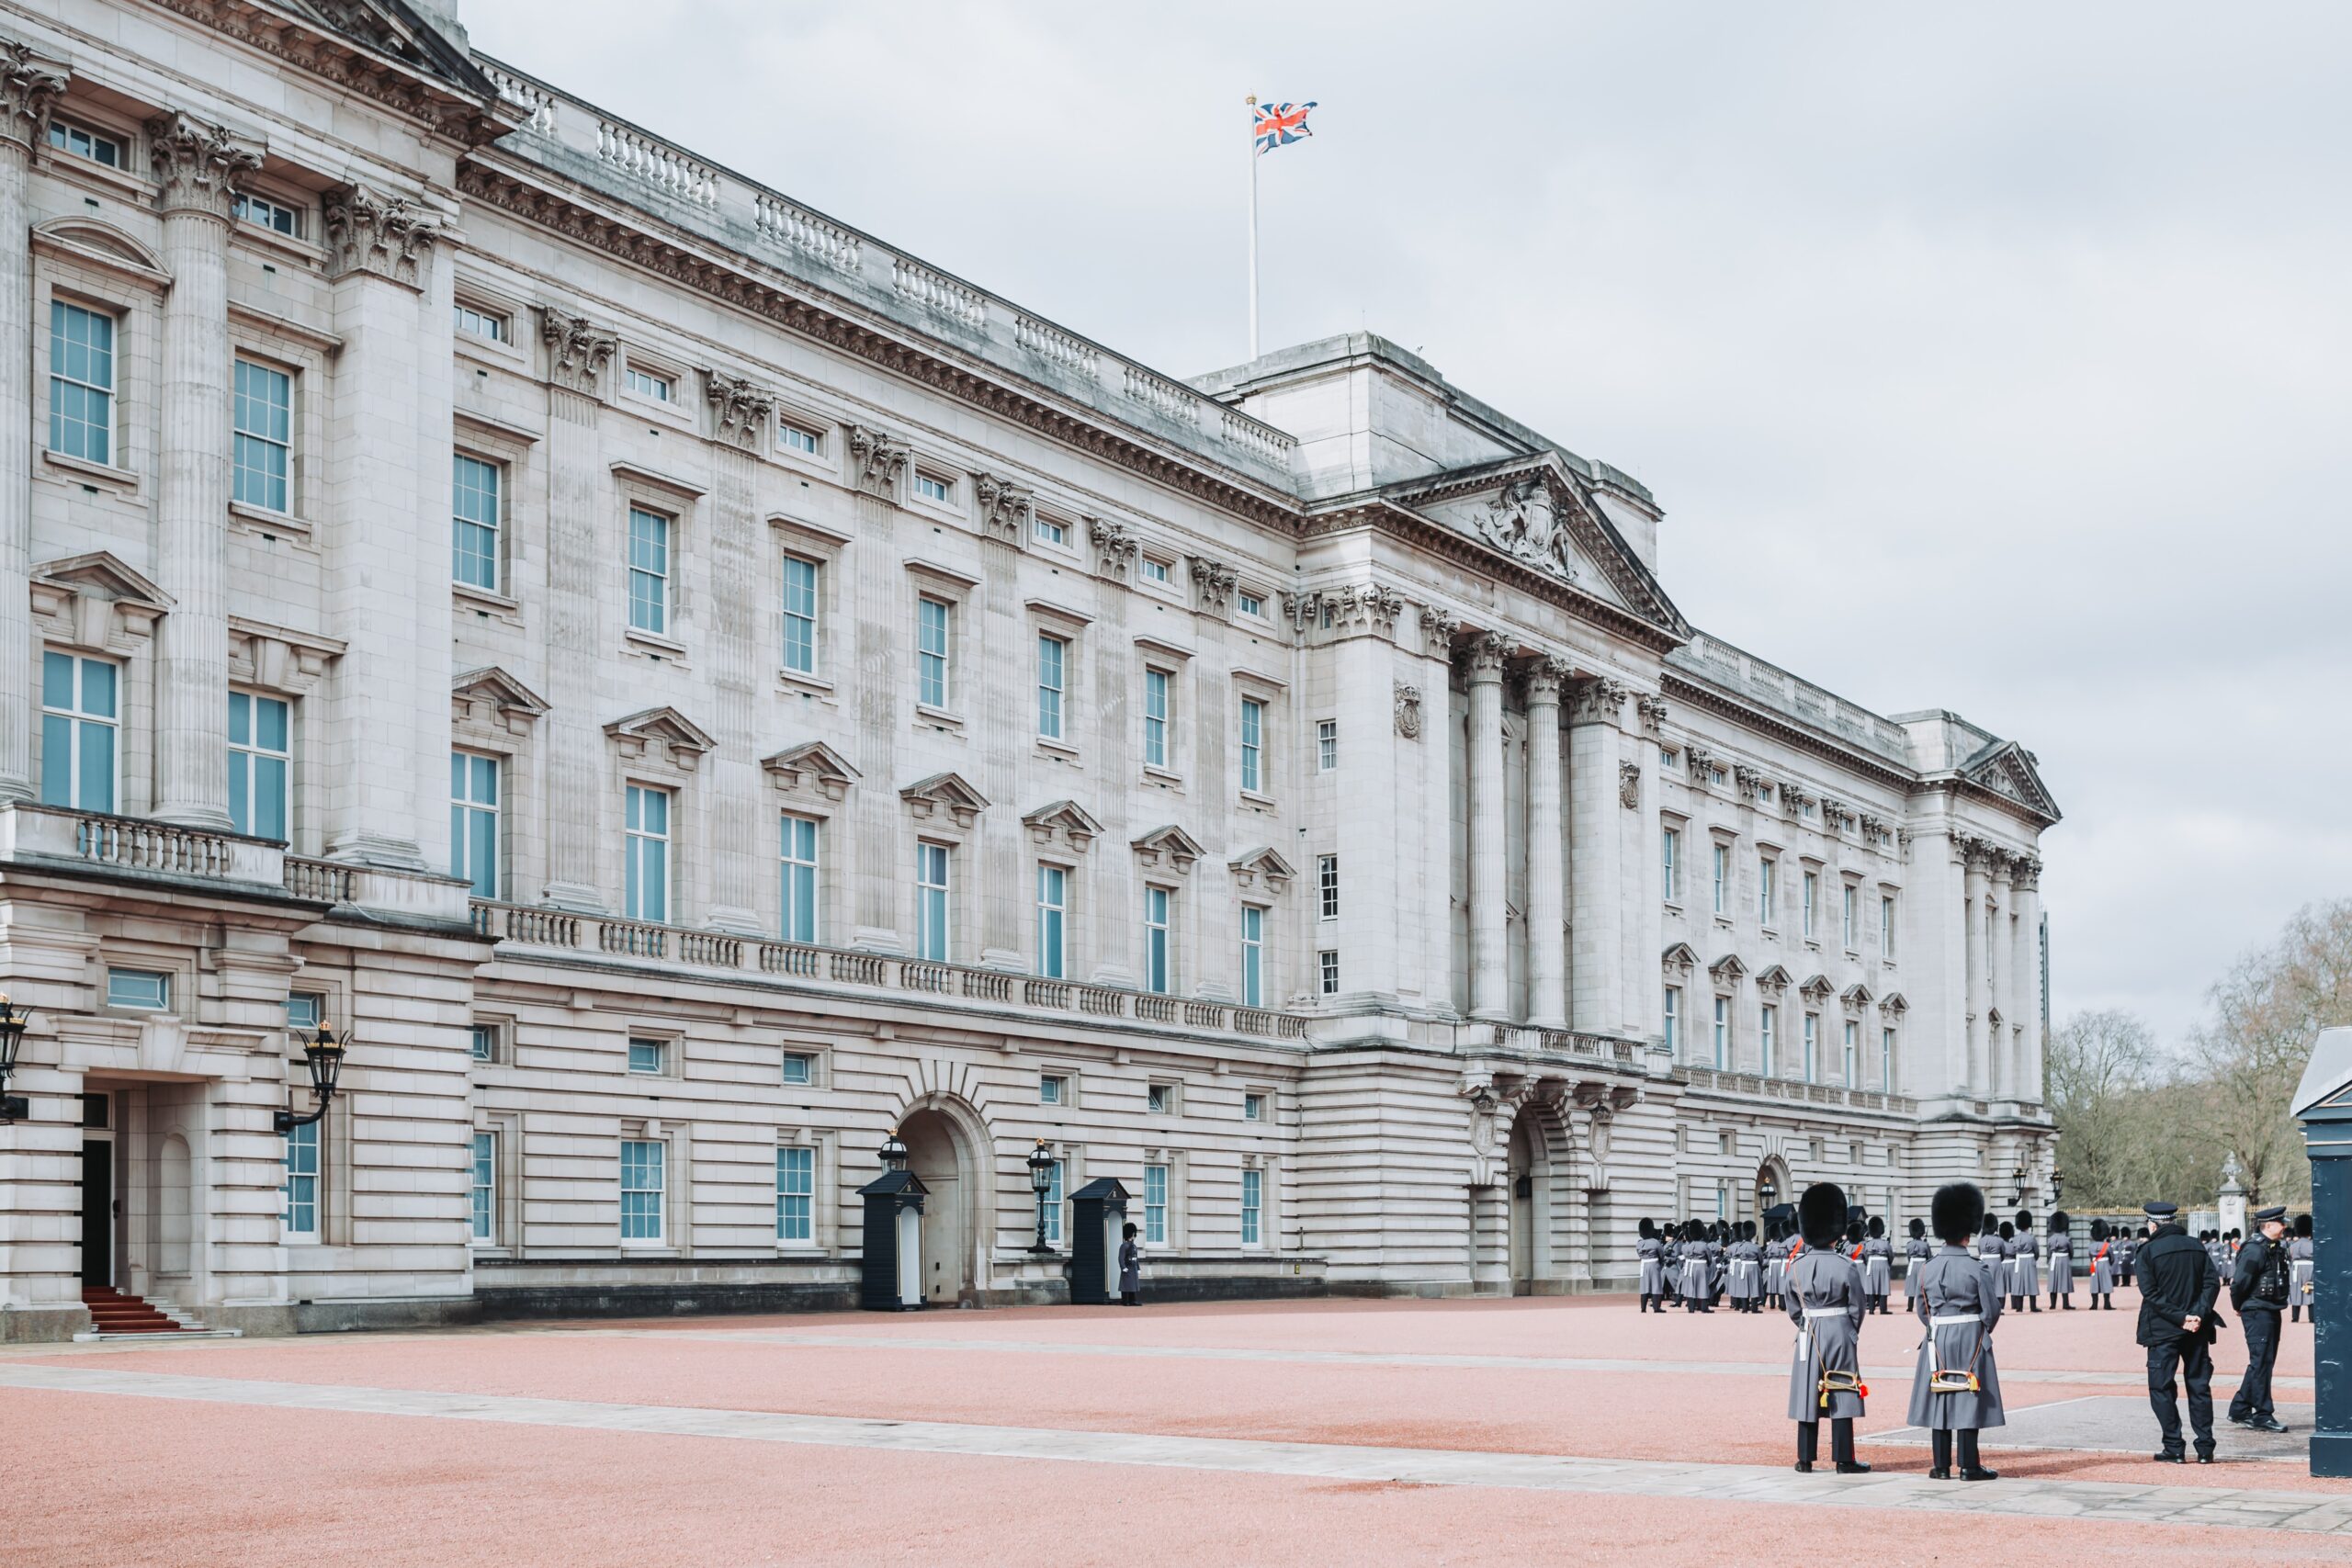 Buckingham Palace is a large royal residence that hosts tours for visitors. Learn more about the expansive palace for the next London trip. 
pictured: Buckingham Palace on a sunny day with British Guards lined at the front of its walls